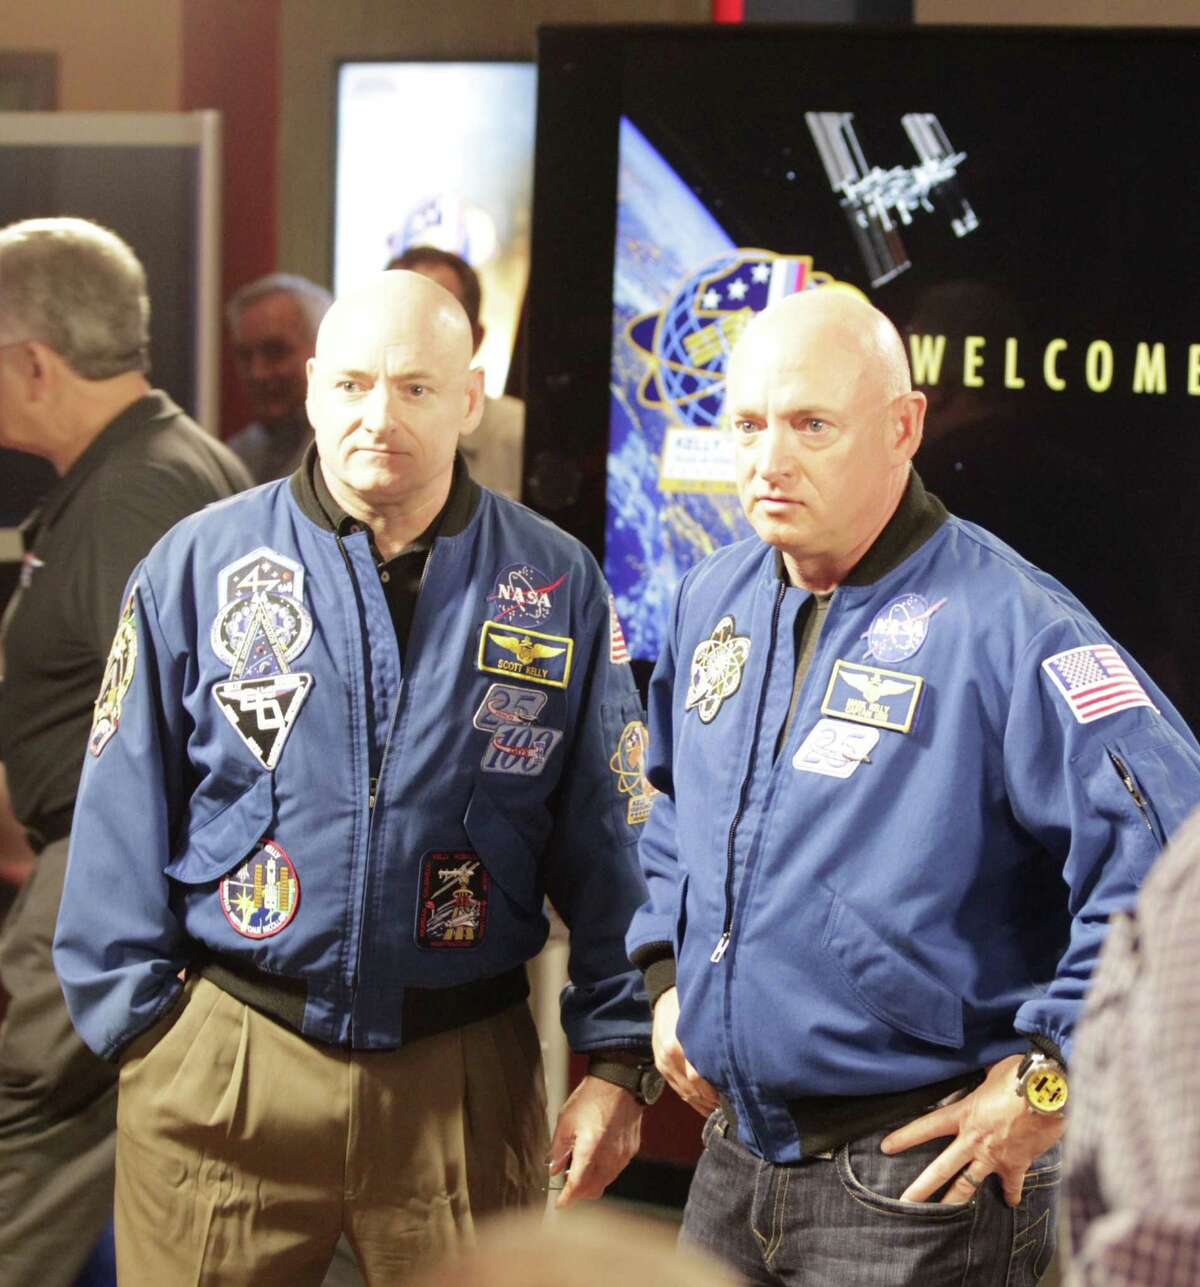 Scott Kelly left, and his twin brother Mark Kelly right, are pictured during a photo-op before a press conference at Johnson Space Center, Friday, March 4, 2016. Scott Kelly just completed nearly a year long stay aboard the International Space Station.